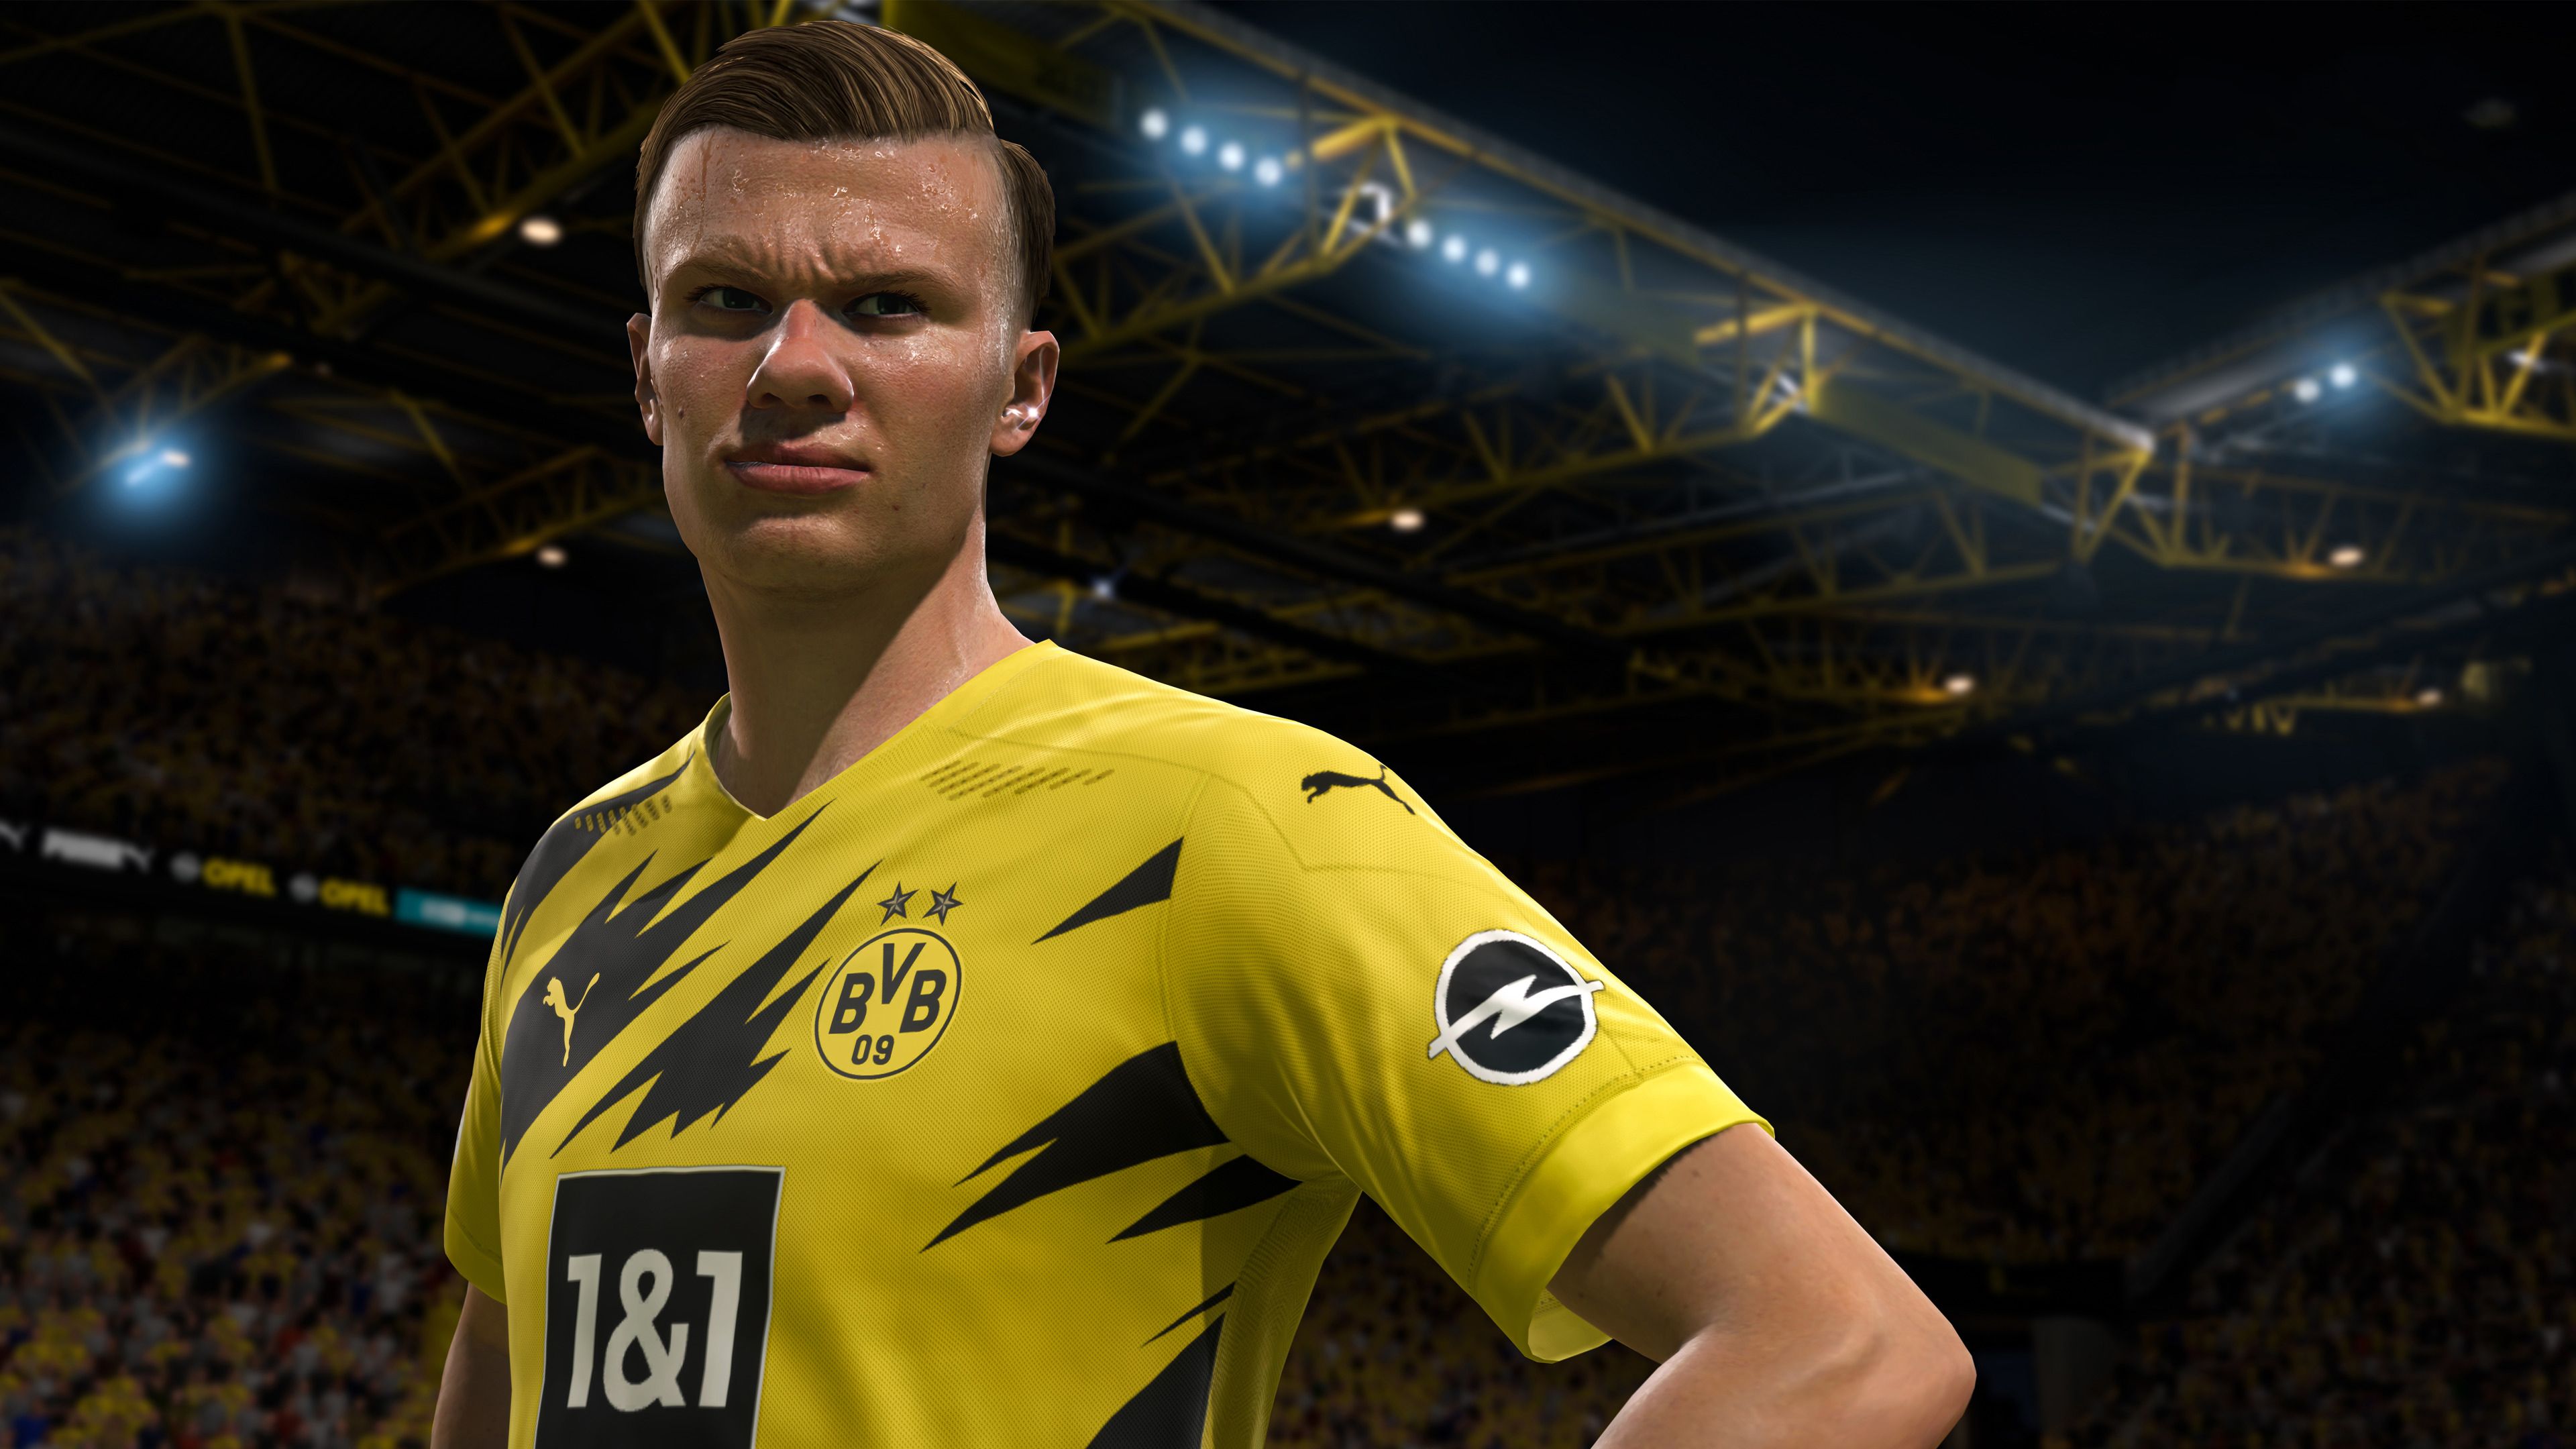 Erling Braut Haland Fifa 21, HD Games, 4k Wallpapers, Image, Backgrounds, Photos and Pictures